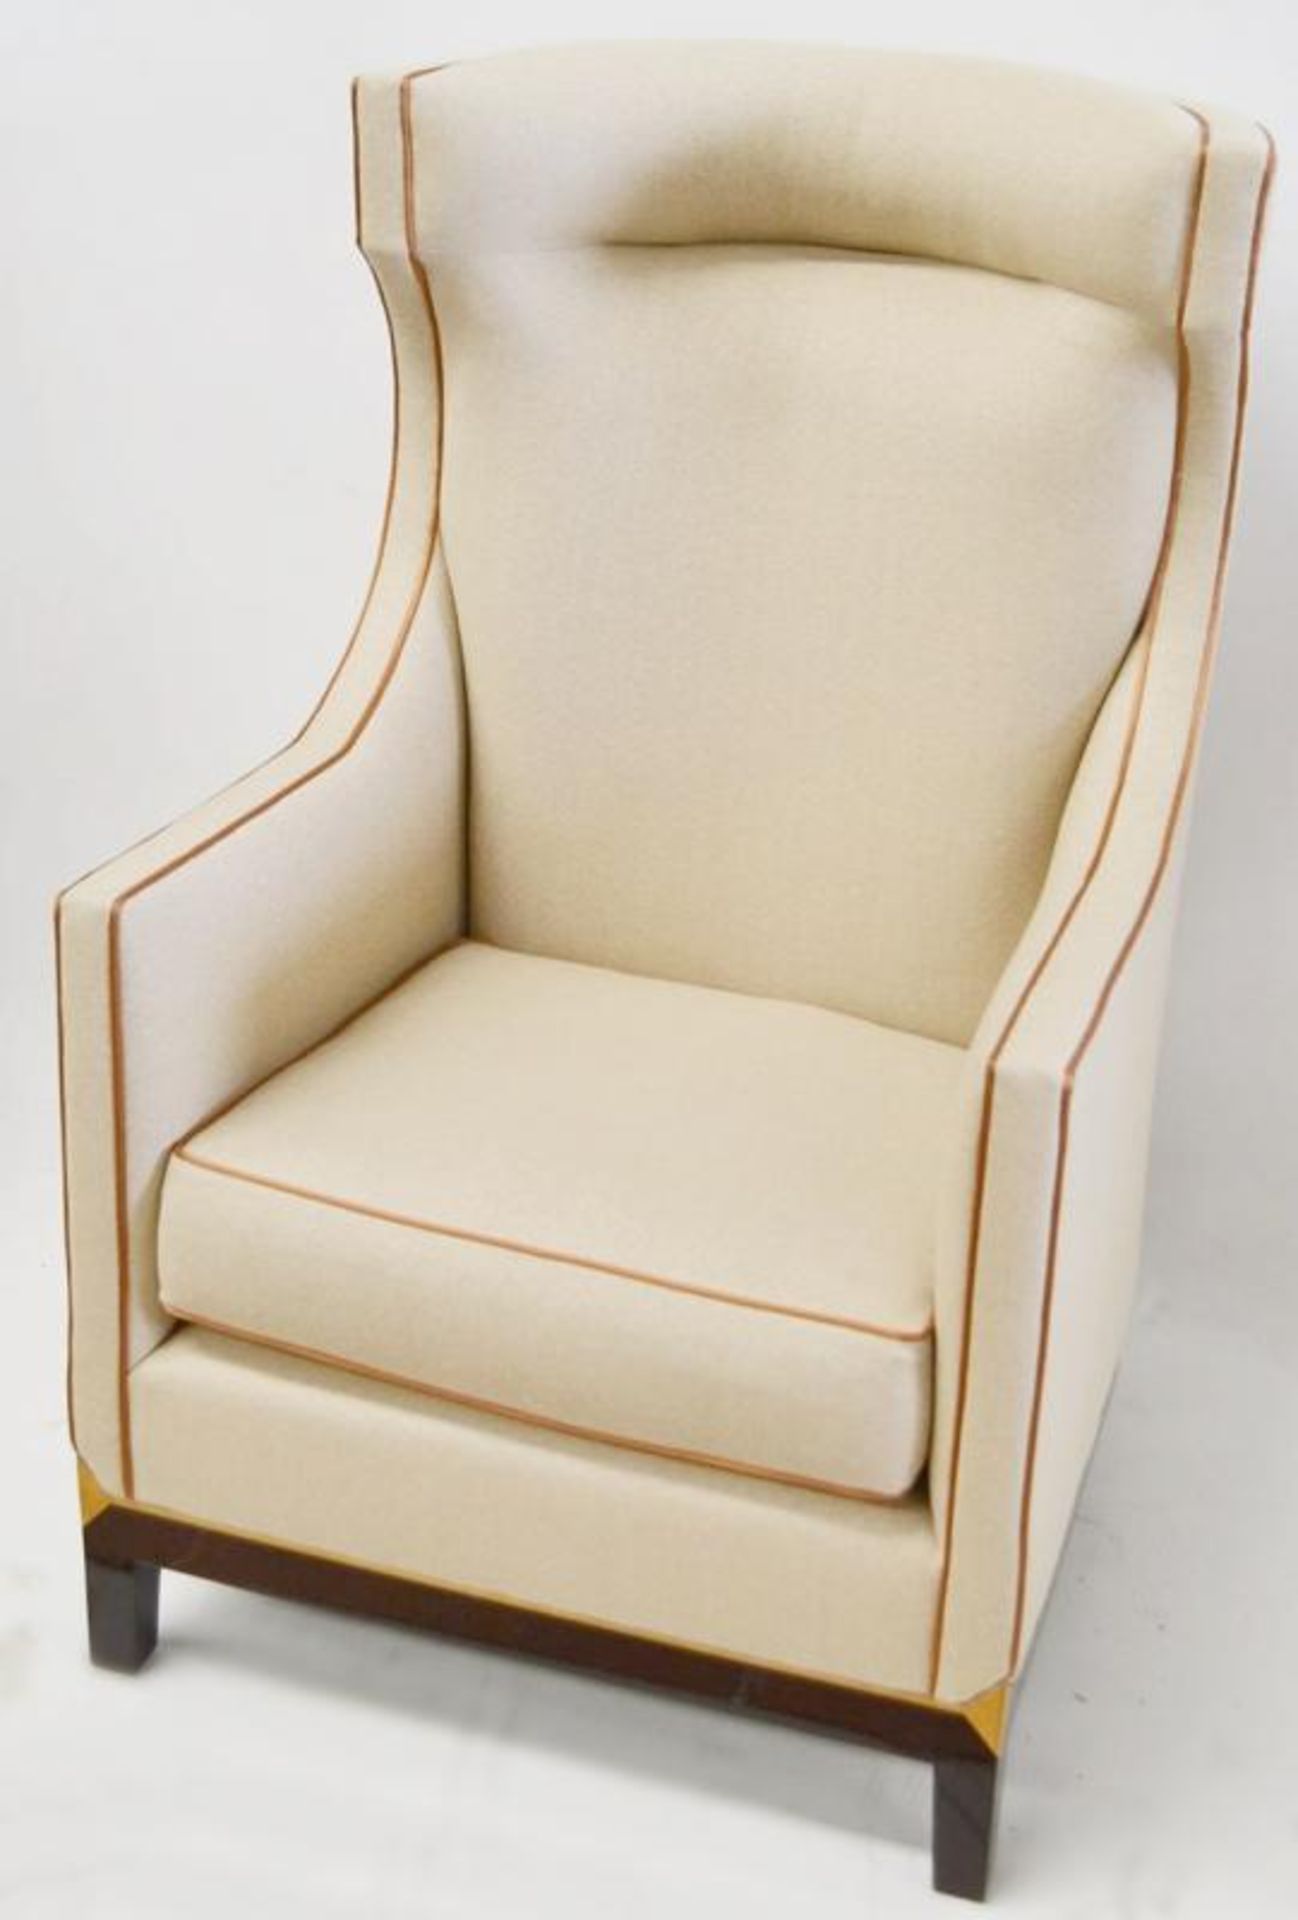 1 x Artistic Upholstery Ltd 'Burlington' Wing Back Chair With A Weatherill Stool In Matching Fabric - Image 9 of 10